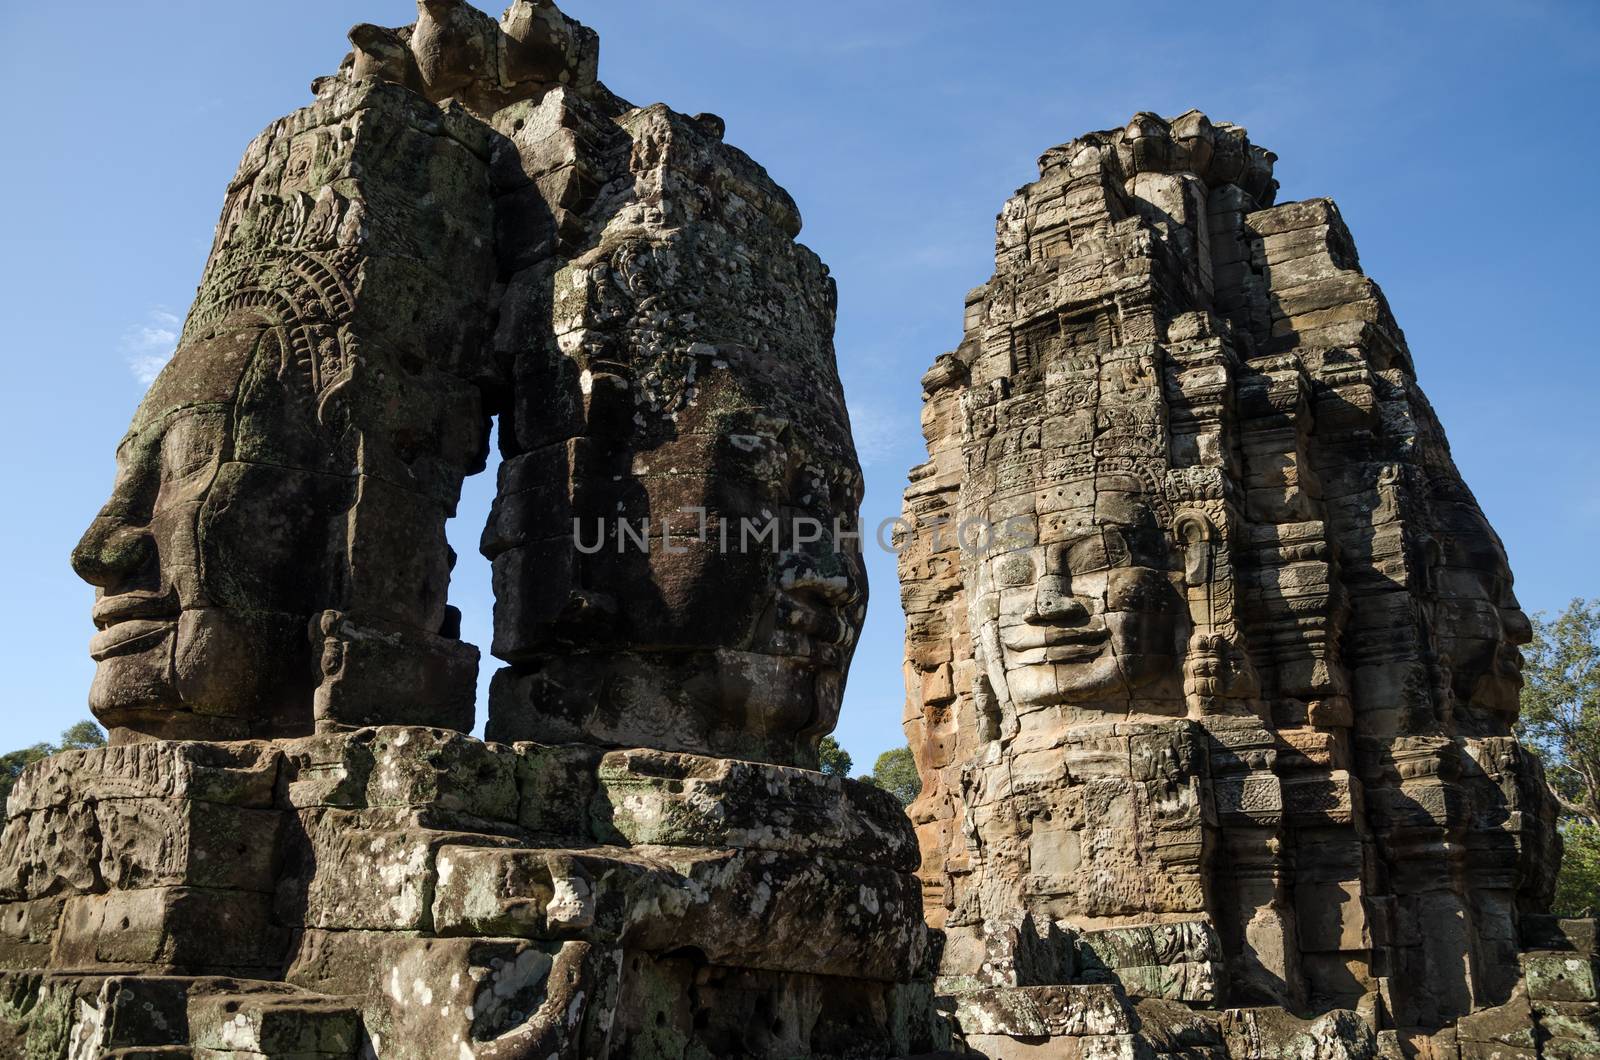 Giant stone faces of Bayon temple in Angkor Thom, Siem Reap, Cambodia